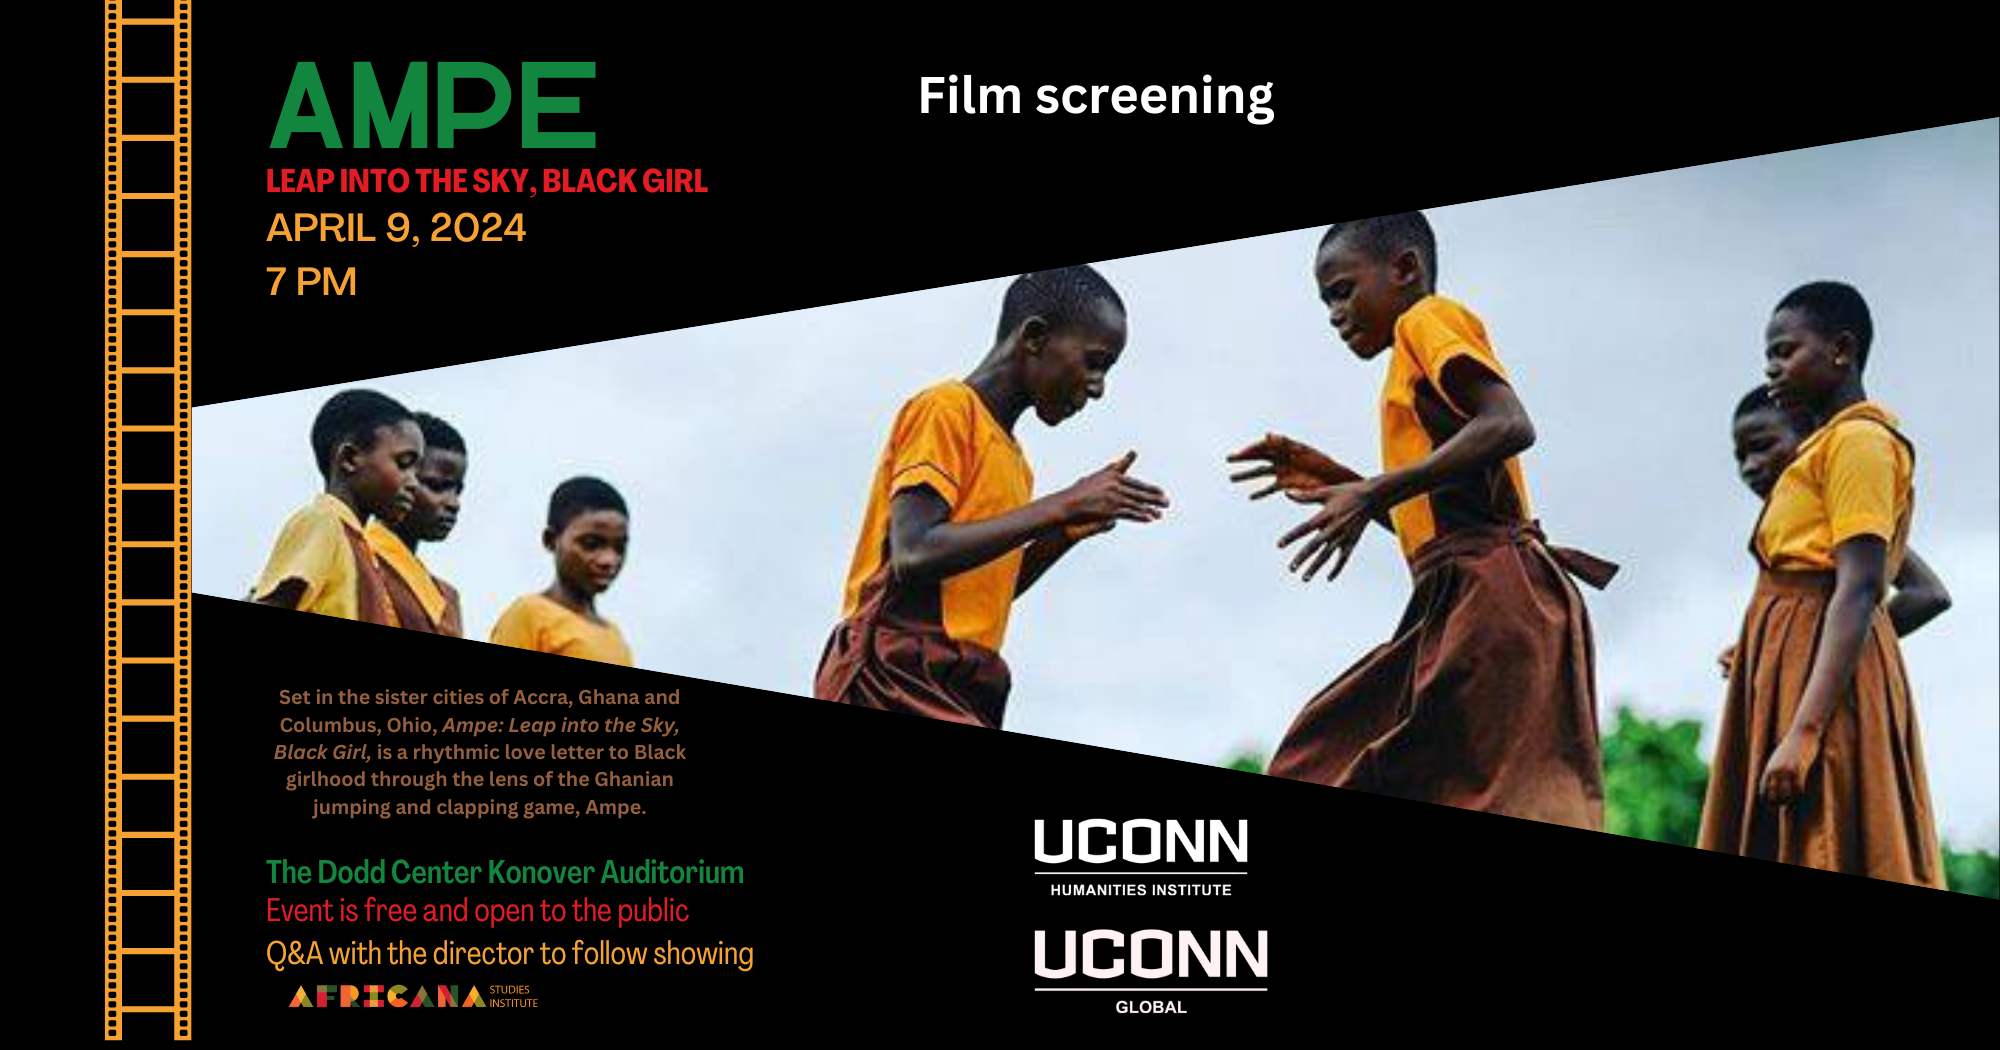 AMPE: Leap into the Sky Black Girl, a film screening. April 9, 7:00pm Konover Auditorium. Q&A with the directors following hte screening. Cosponsored by Africana Studies, UConn Humanities Institute, and UConn Global.